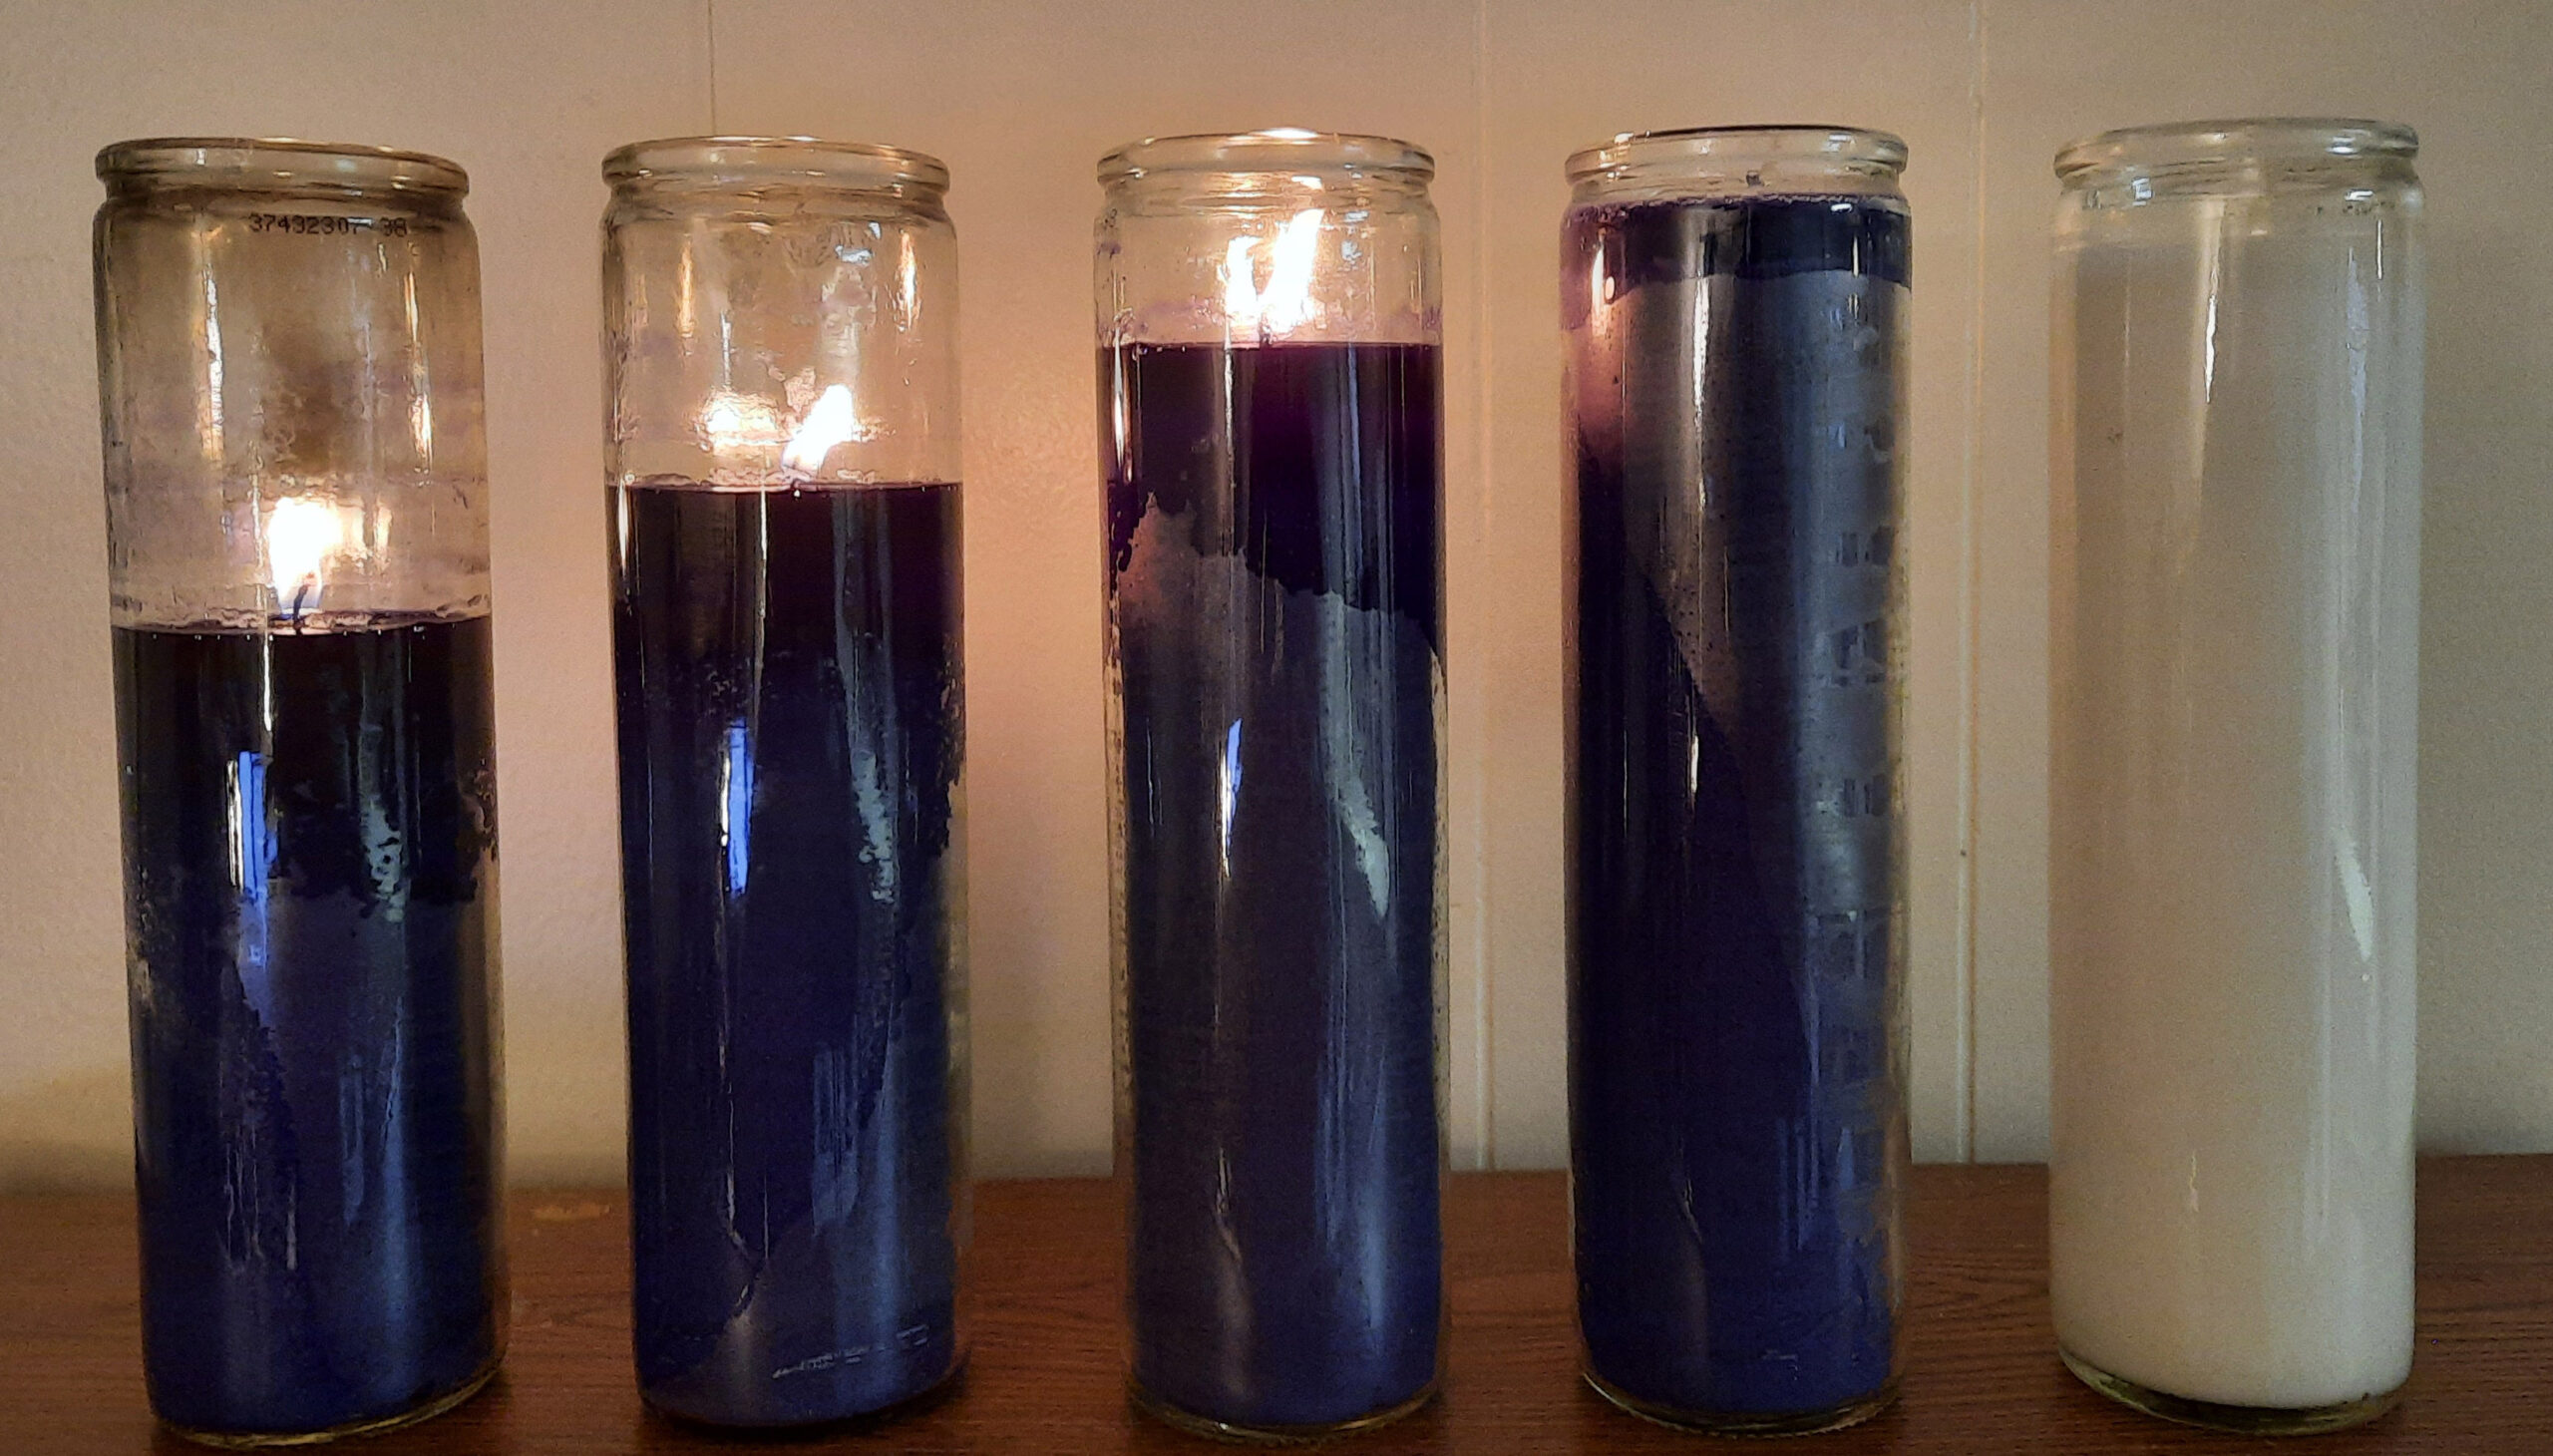 Four purple candles and a white candle, with three of the candles lit.